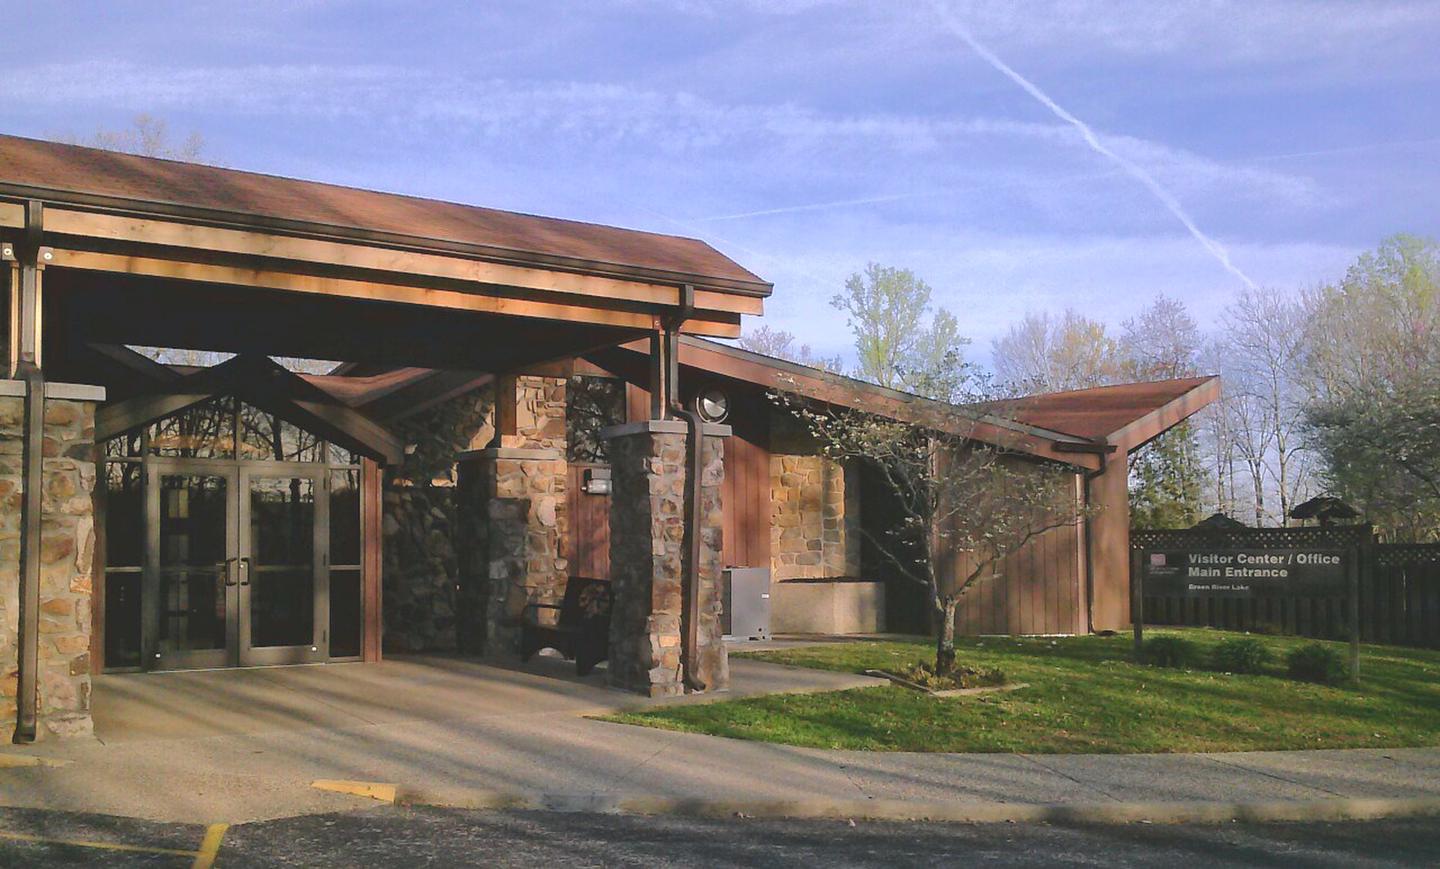 Corps Visitor Center